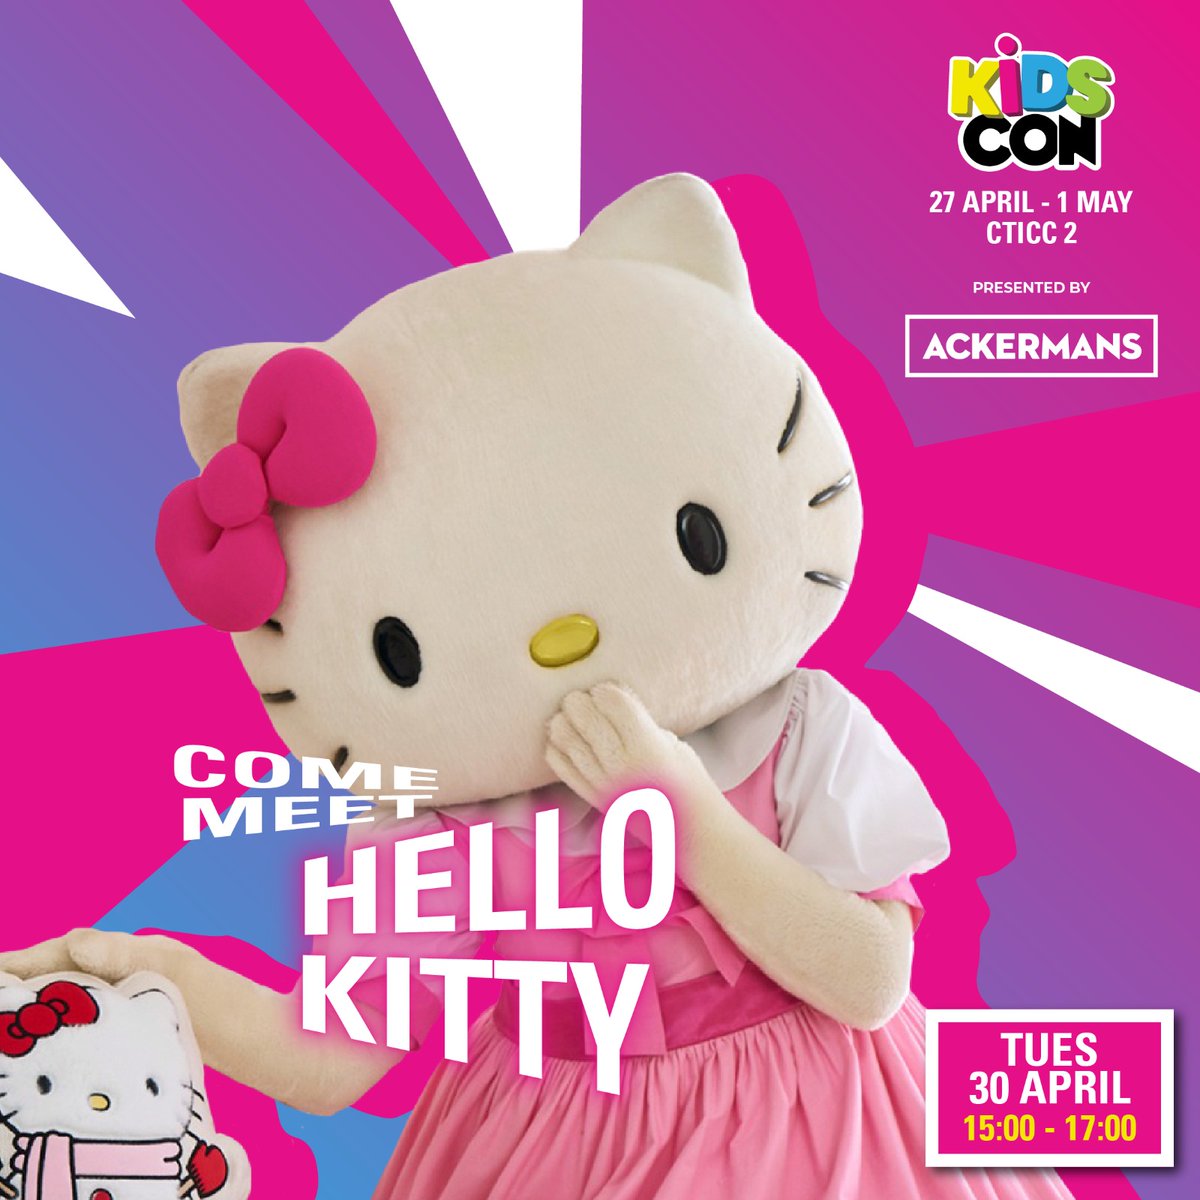 Ackermans SA is proud to present Hello Kitty LIVE at #ComicConCapeTown on Tues 30th April between 3 – 5 pm at CTICC 2. Don’t miss your chance to meet this pop culture icon! And remember, Ackermans SA has you covered for all your favourite character attire!”